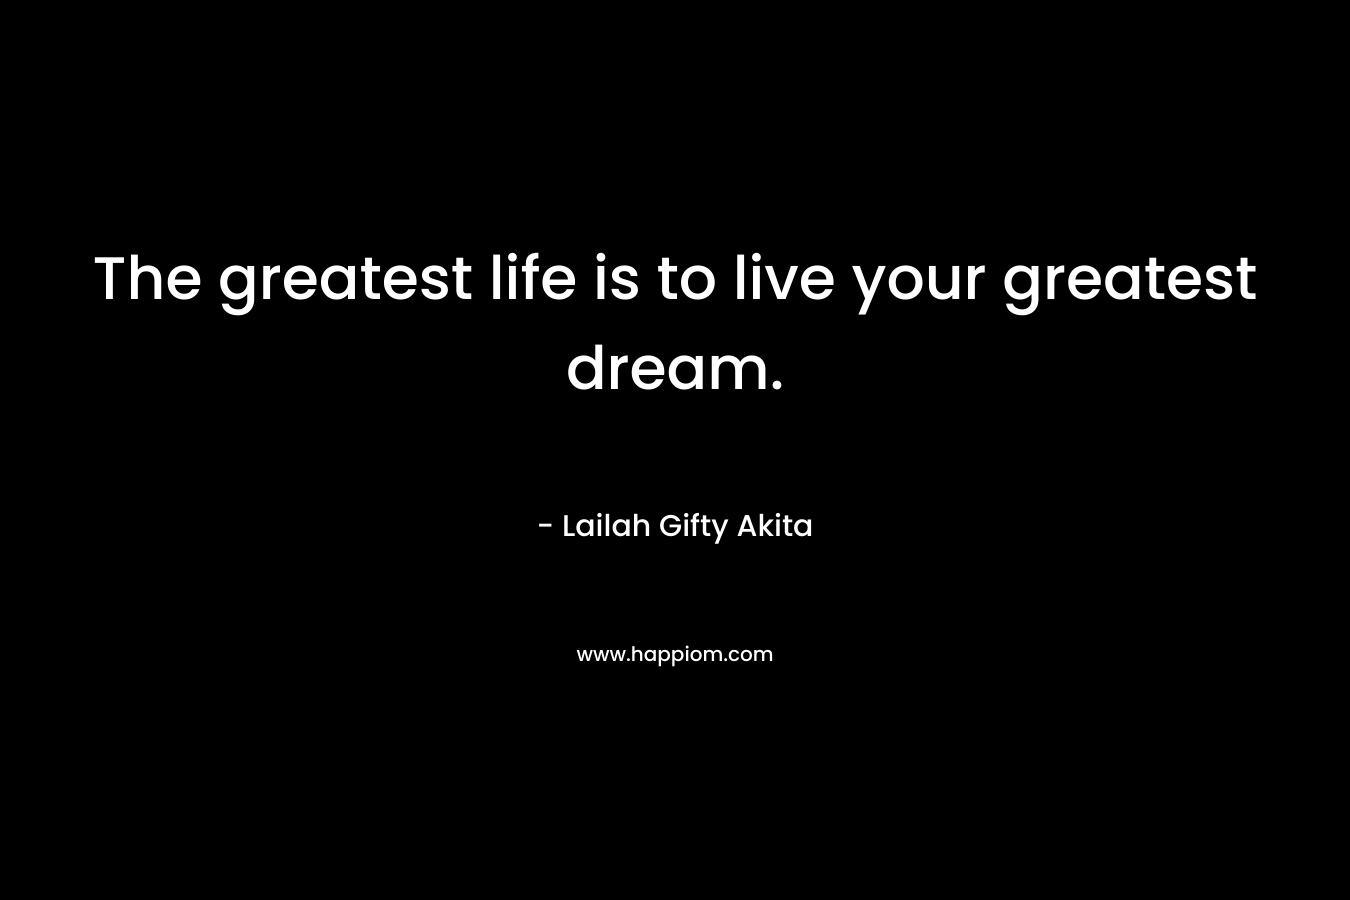 The greatest life is to live your greatest dream.